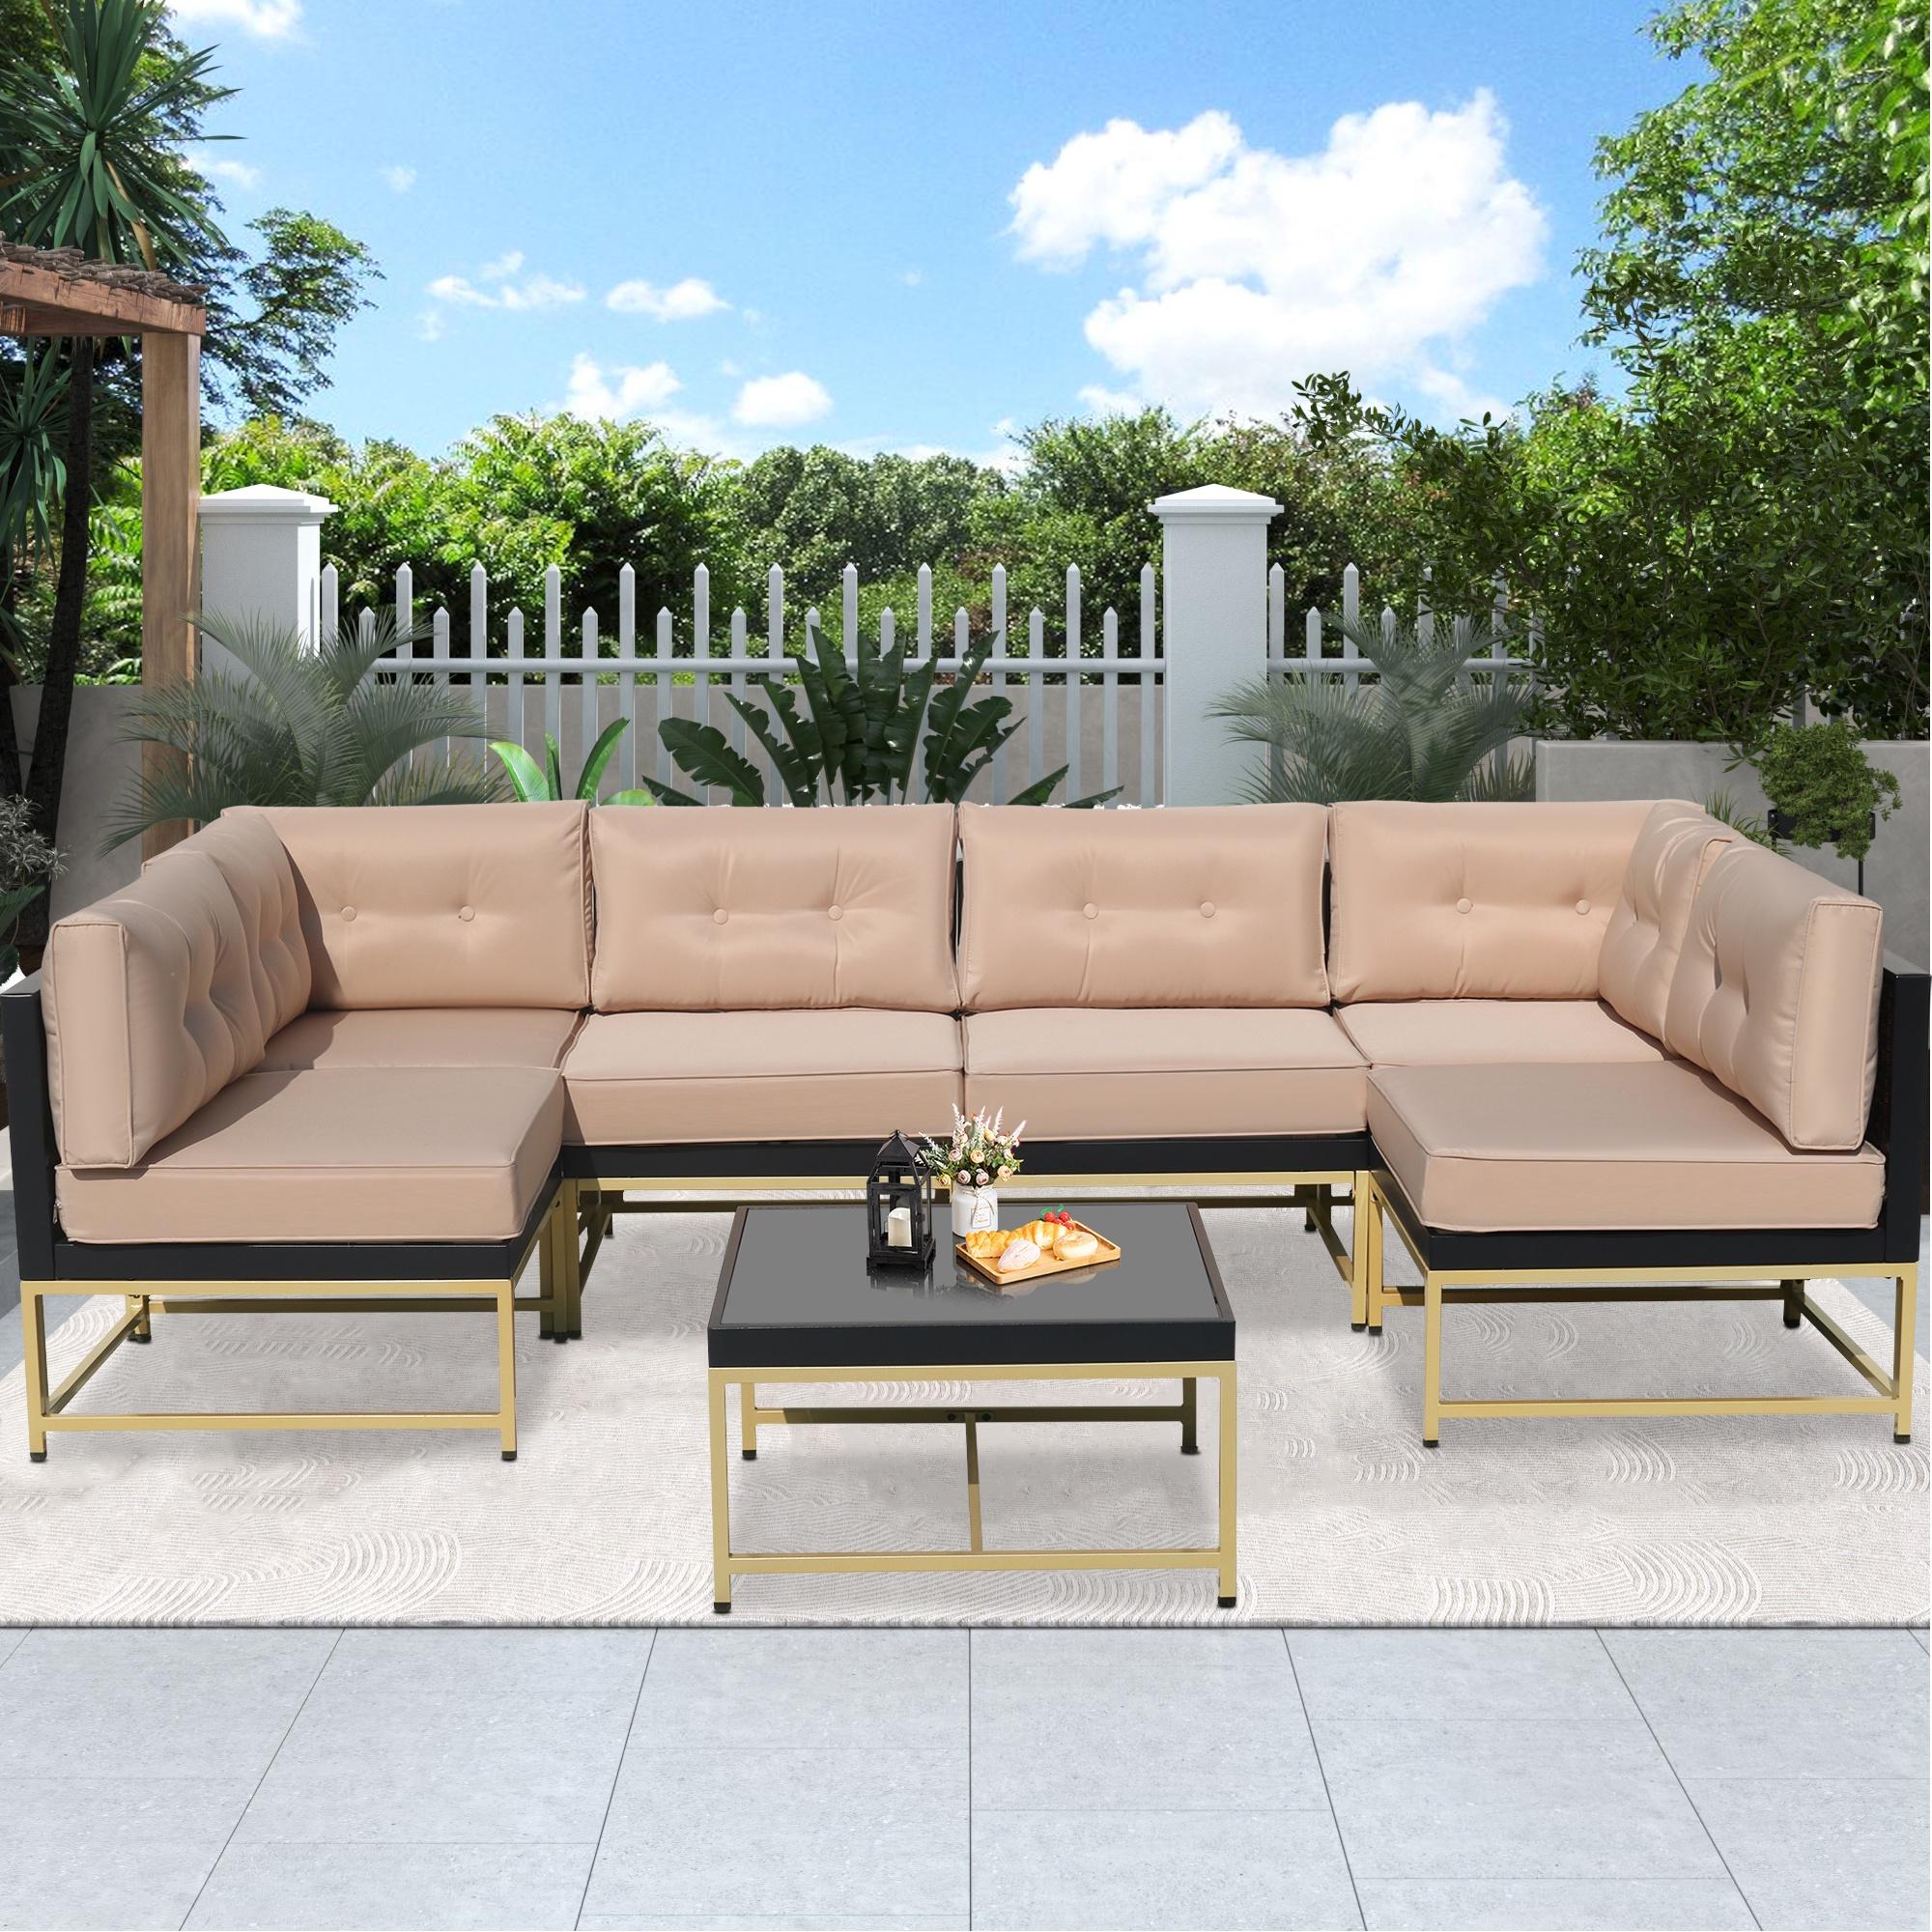 Patio Outdoor Furniture Sets, 7 Pieces All-Weather Rattan Sectional Sofa with Tea Table and Cushions, PE Rattan Wicker Sofa Couch Conversation Set for Garden Backyard Poolside - image 3 of 11